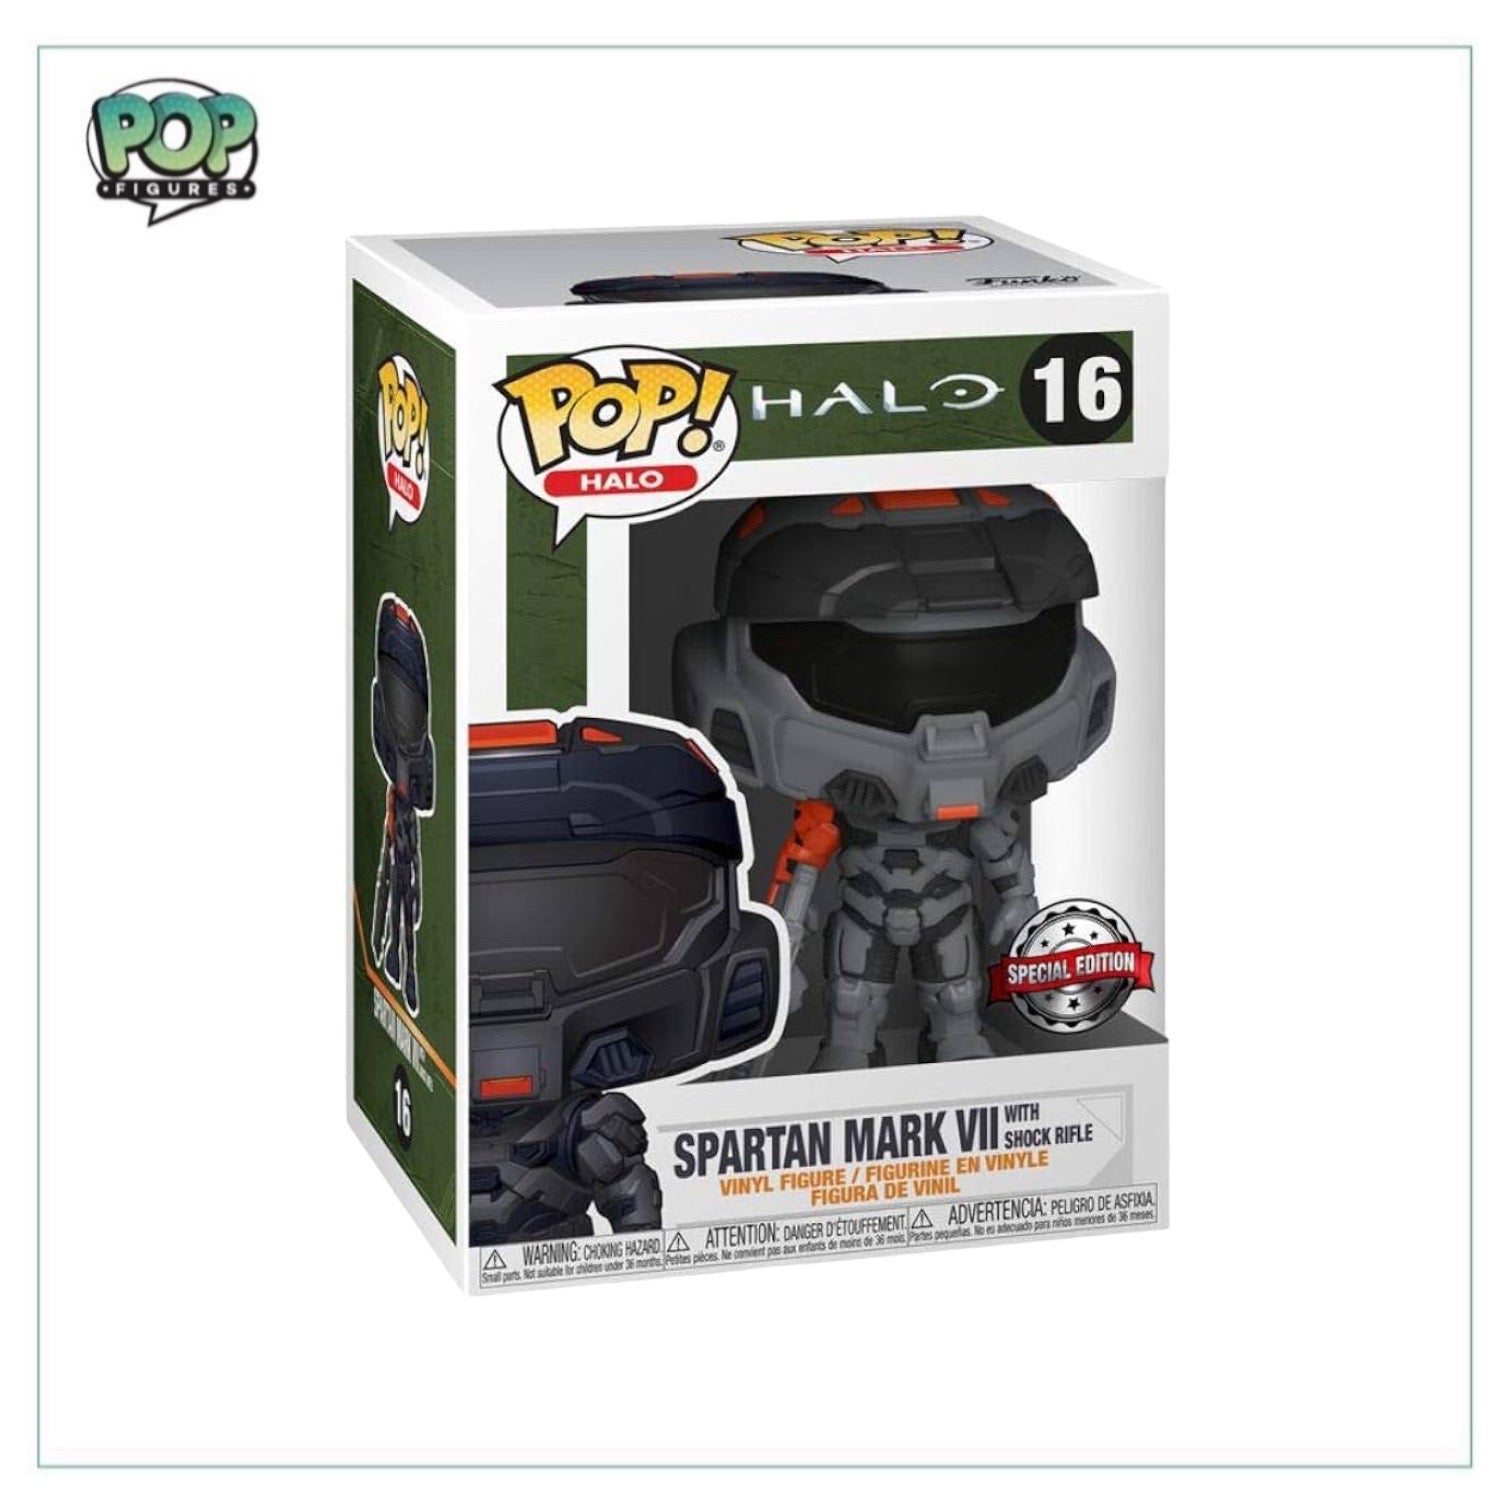 Spartan Mark VII with Shock Rifle #16 Funko Pop! - Halo - Special Edition